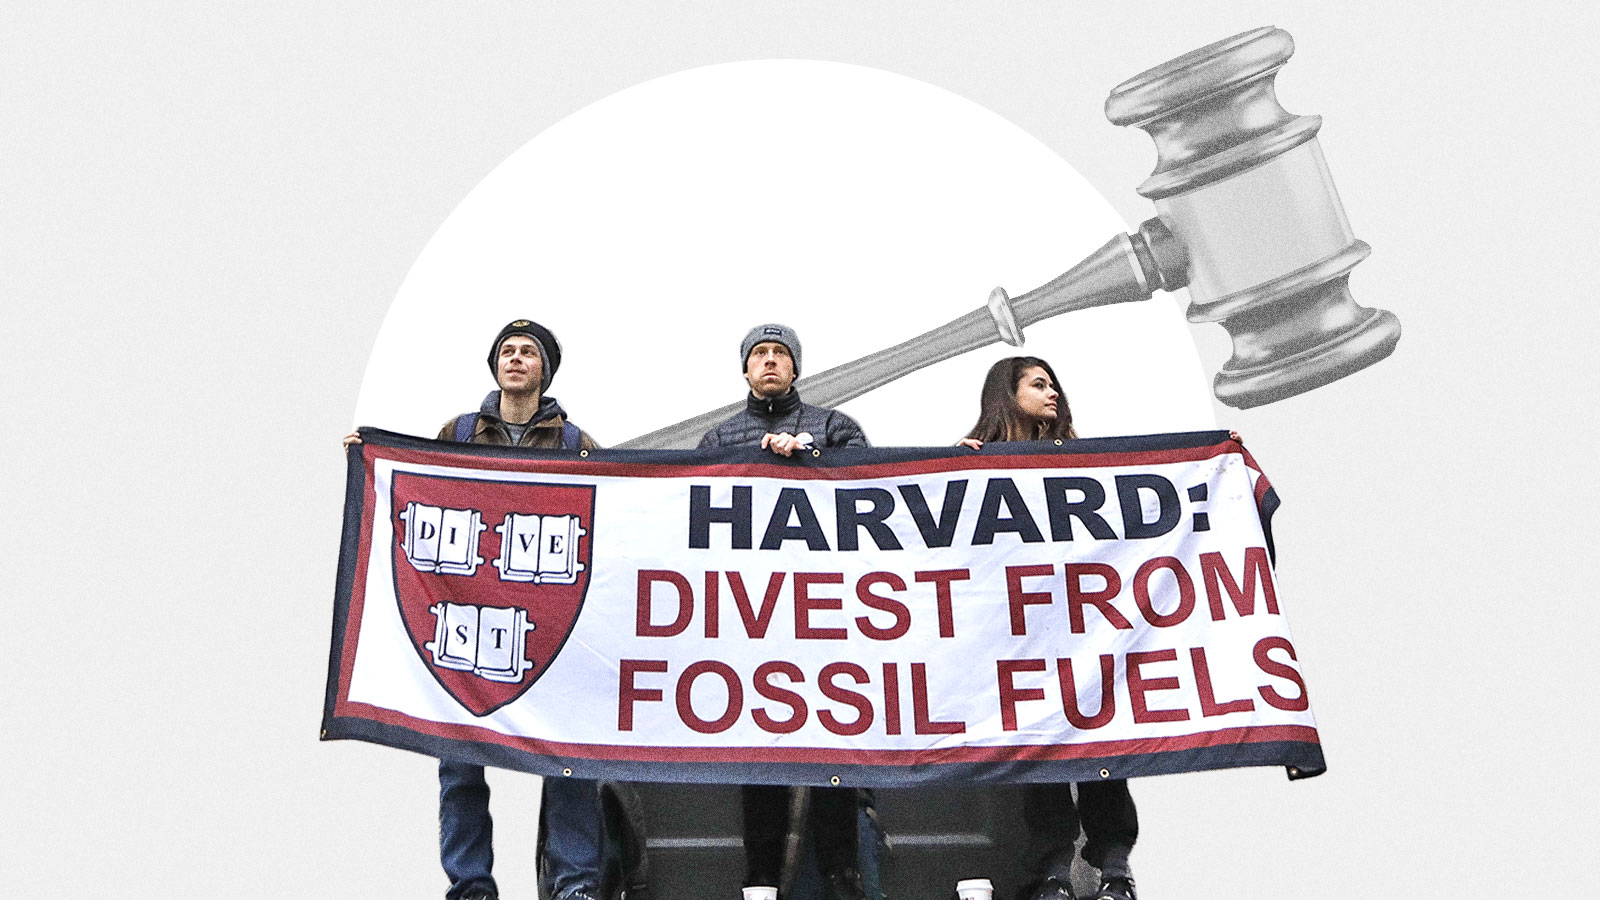 Students protesting Harvard to divest from fossil fuels with a gavel in the background